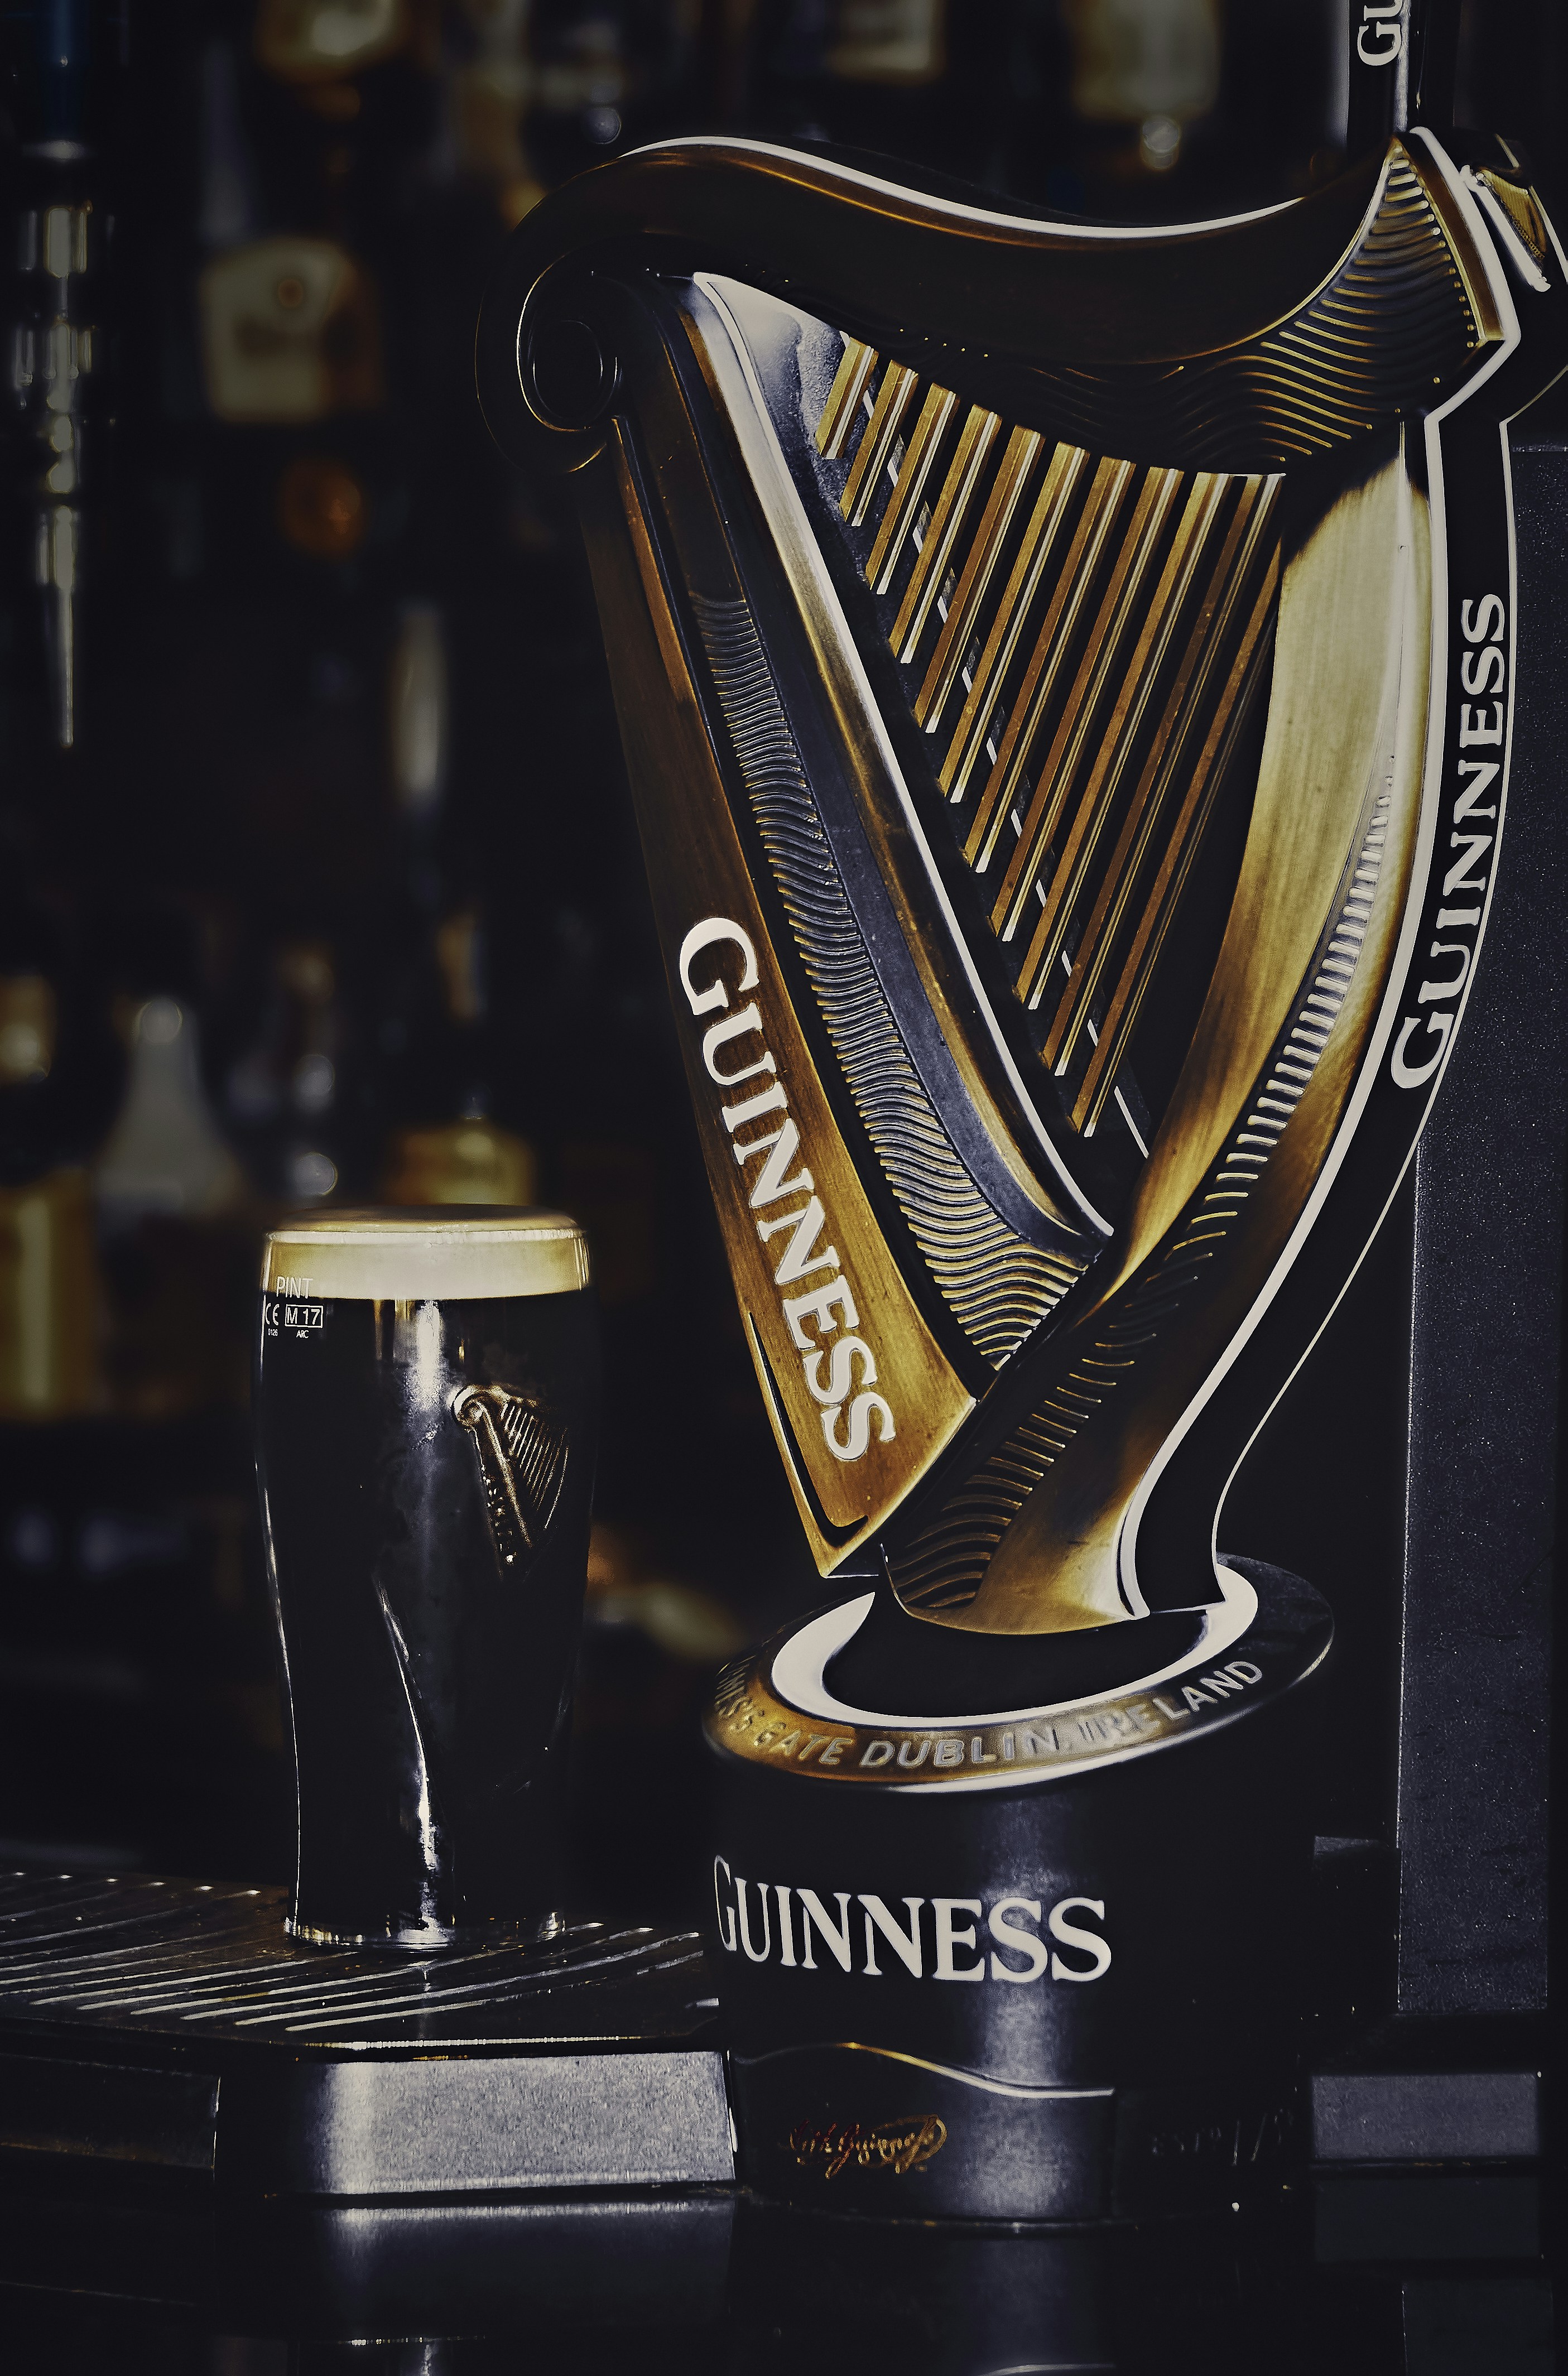 The perfect pint of Guinness (May, 2019).